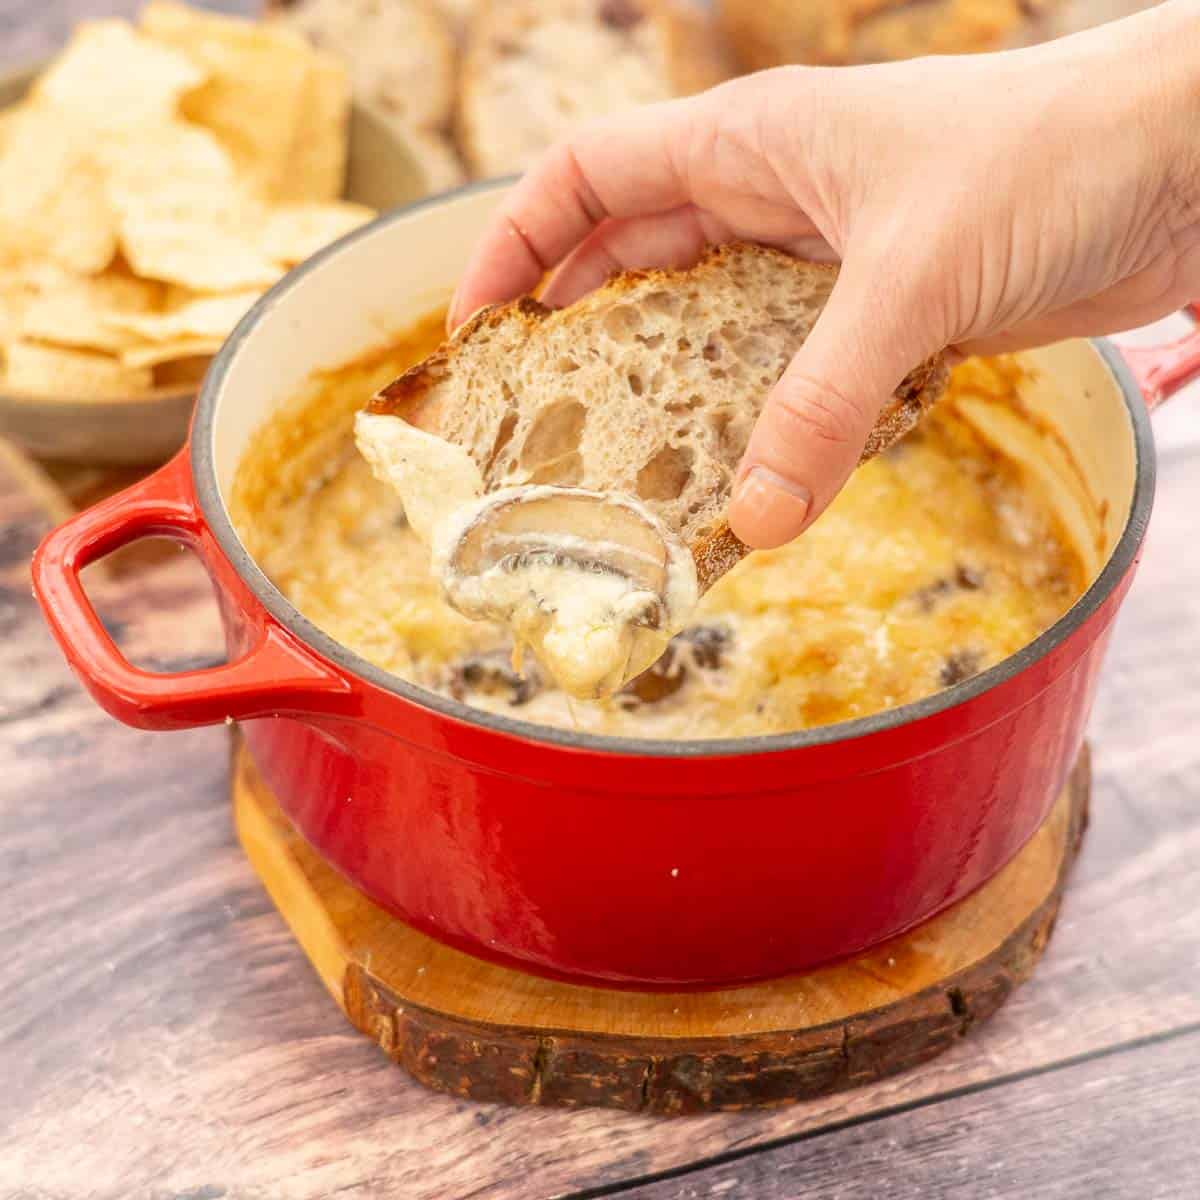 A hand scooping cheesy baked dip with a piece of sour dough bread, a mushroom visible in the dip.